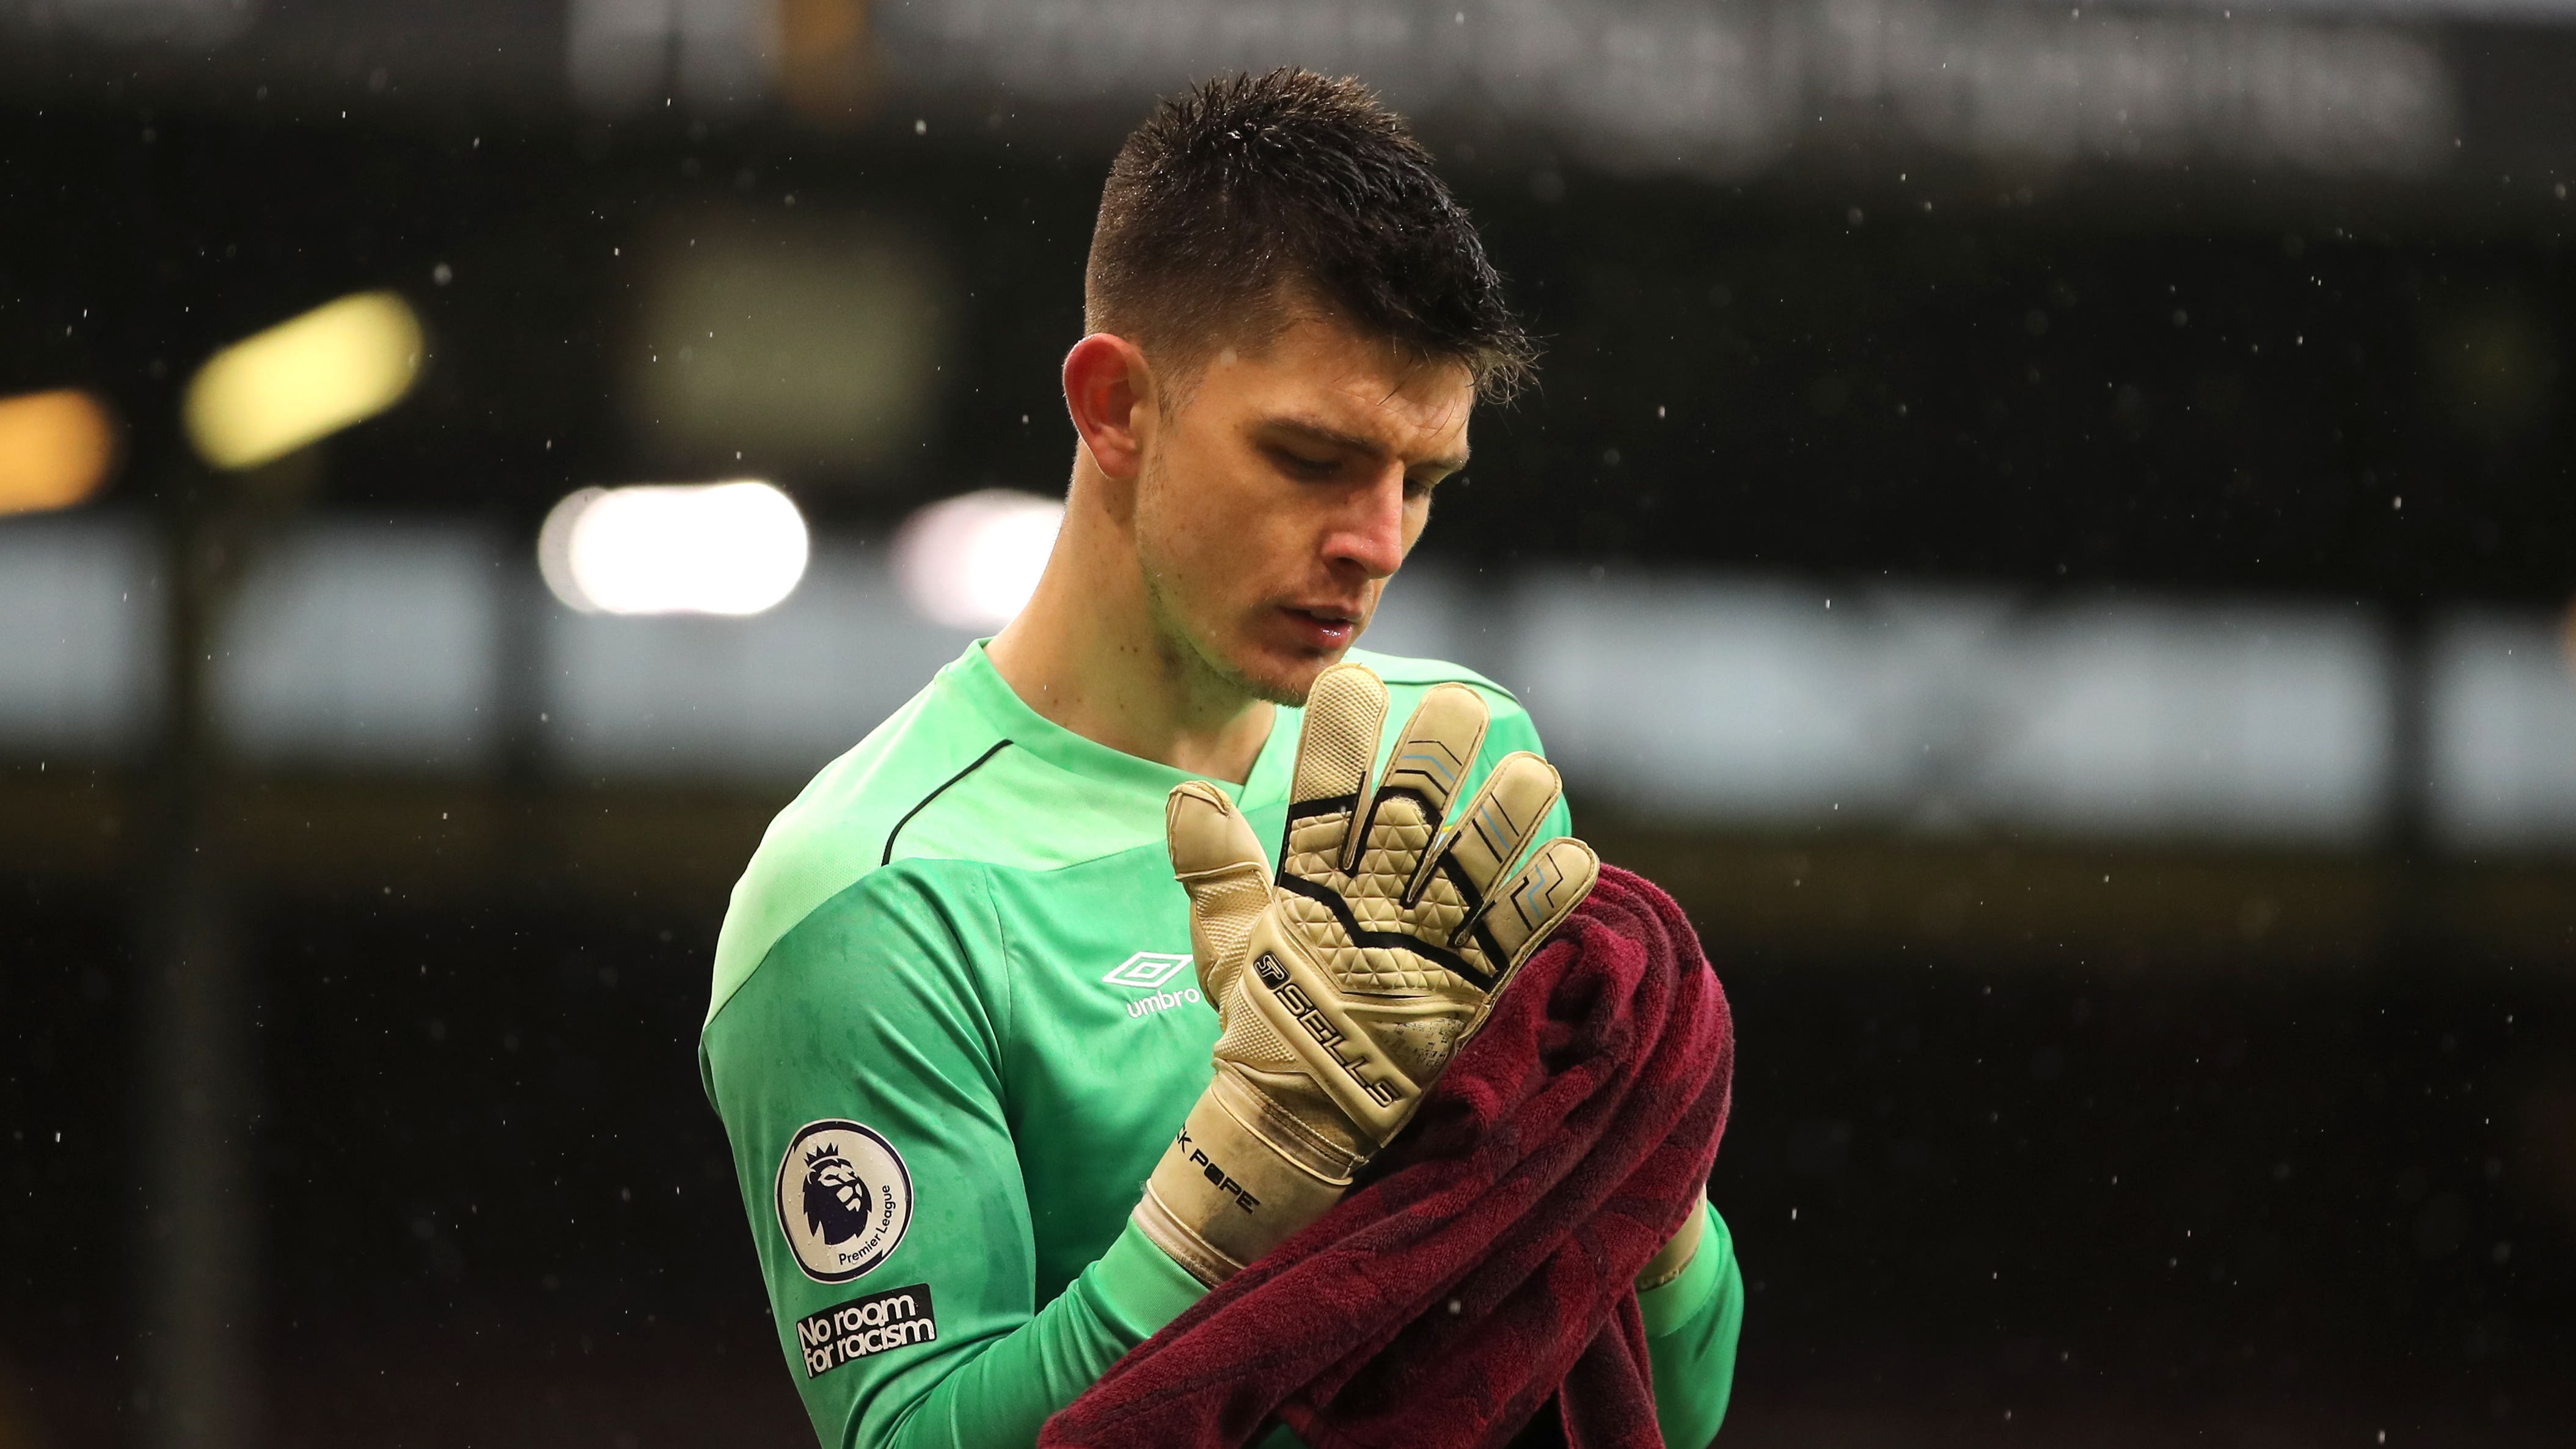 Nick Pope “touch and go” as Burnley bid for more success at Old Trafford